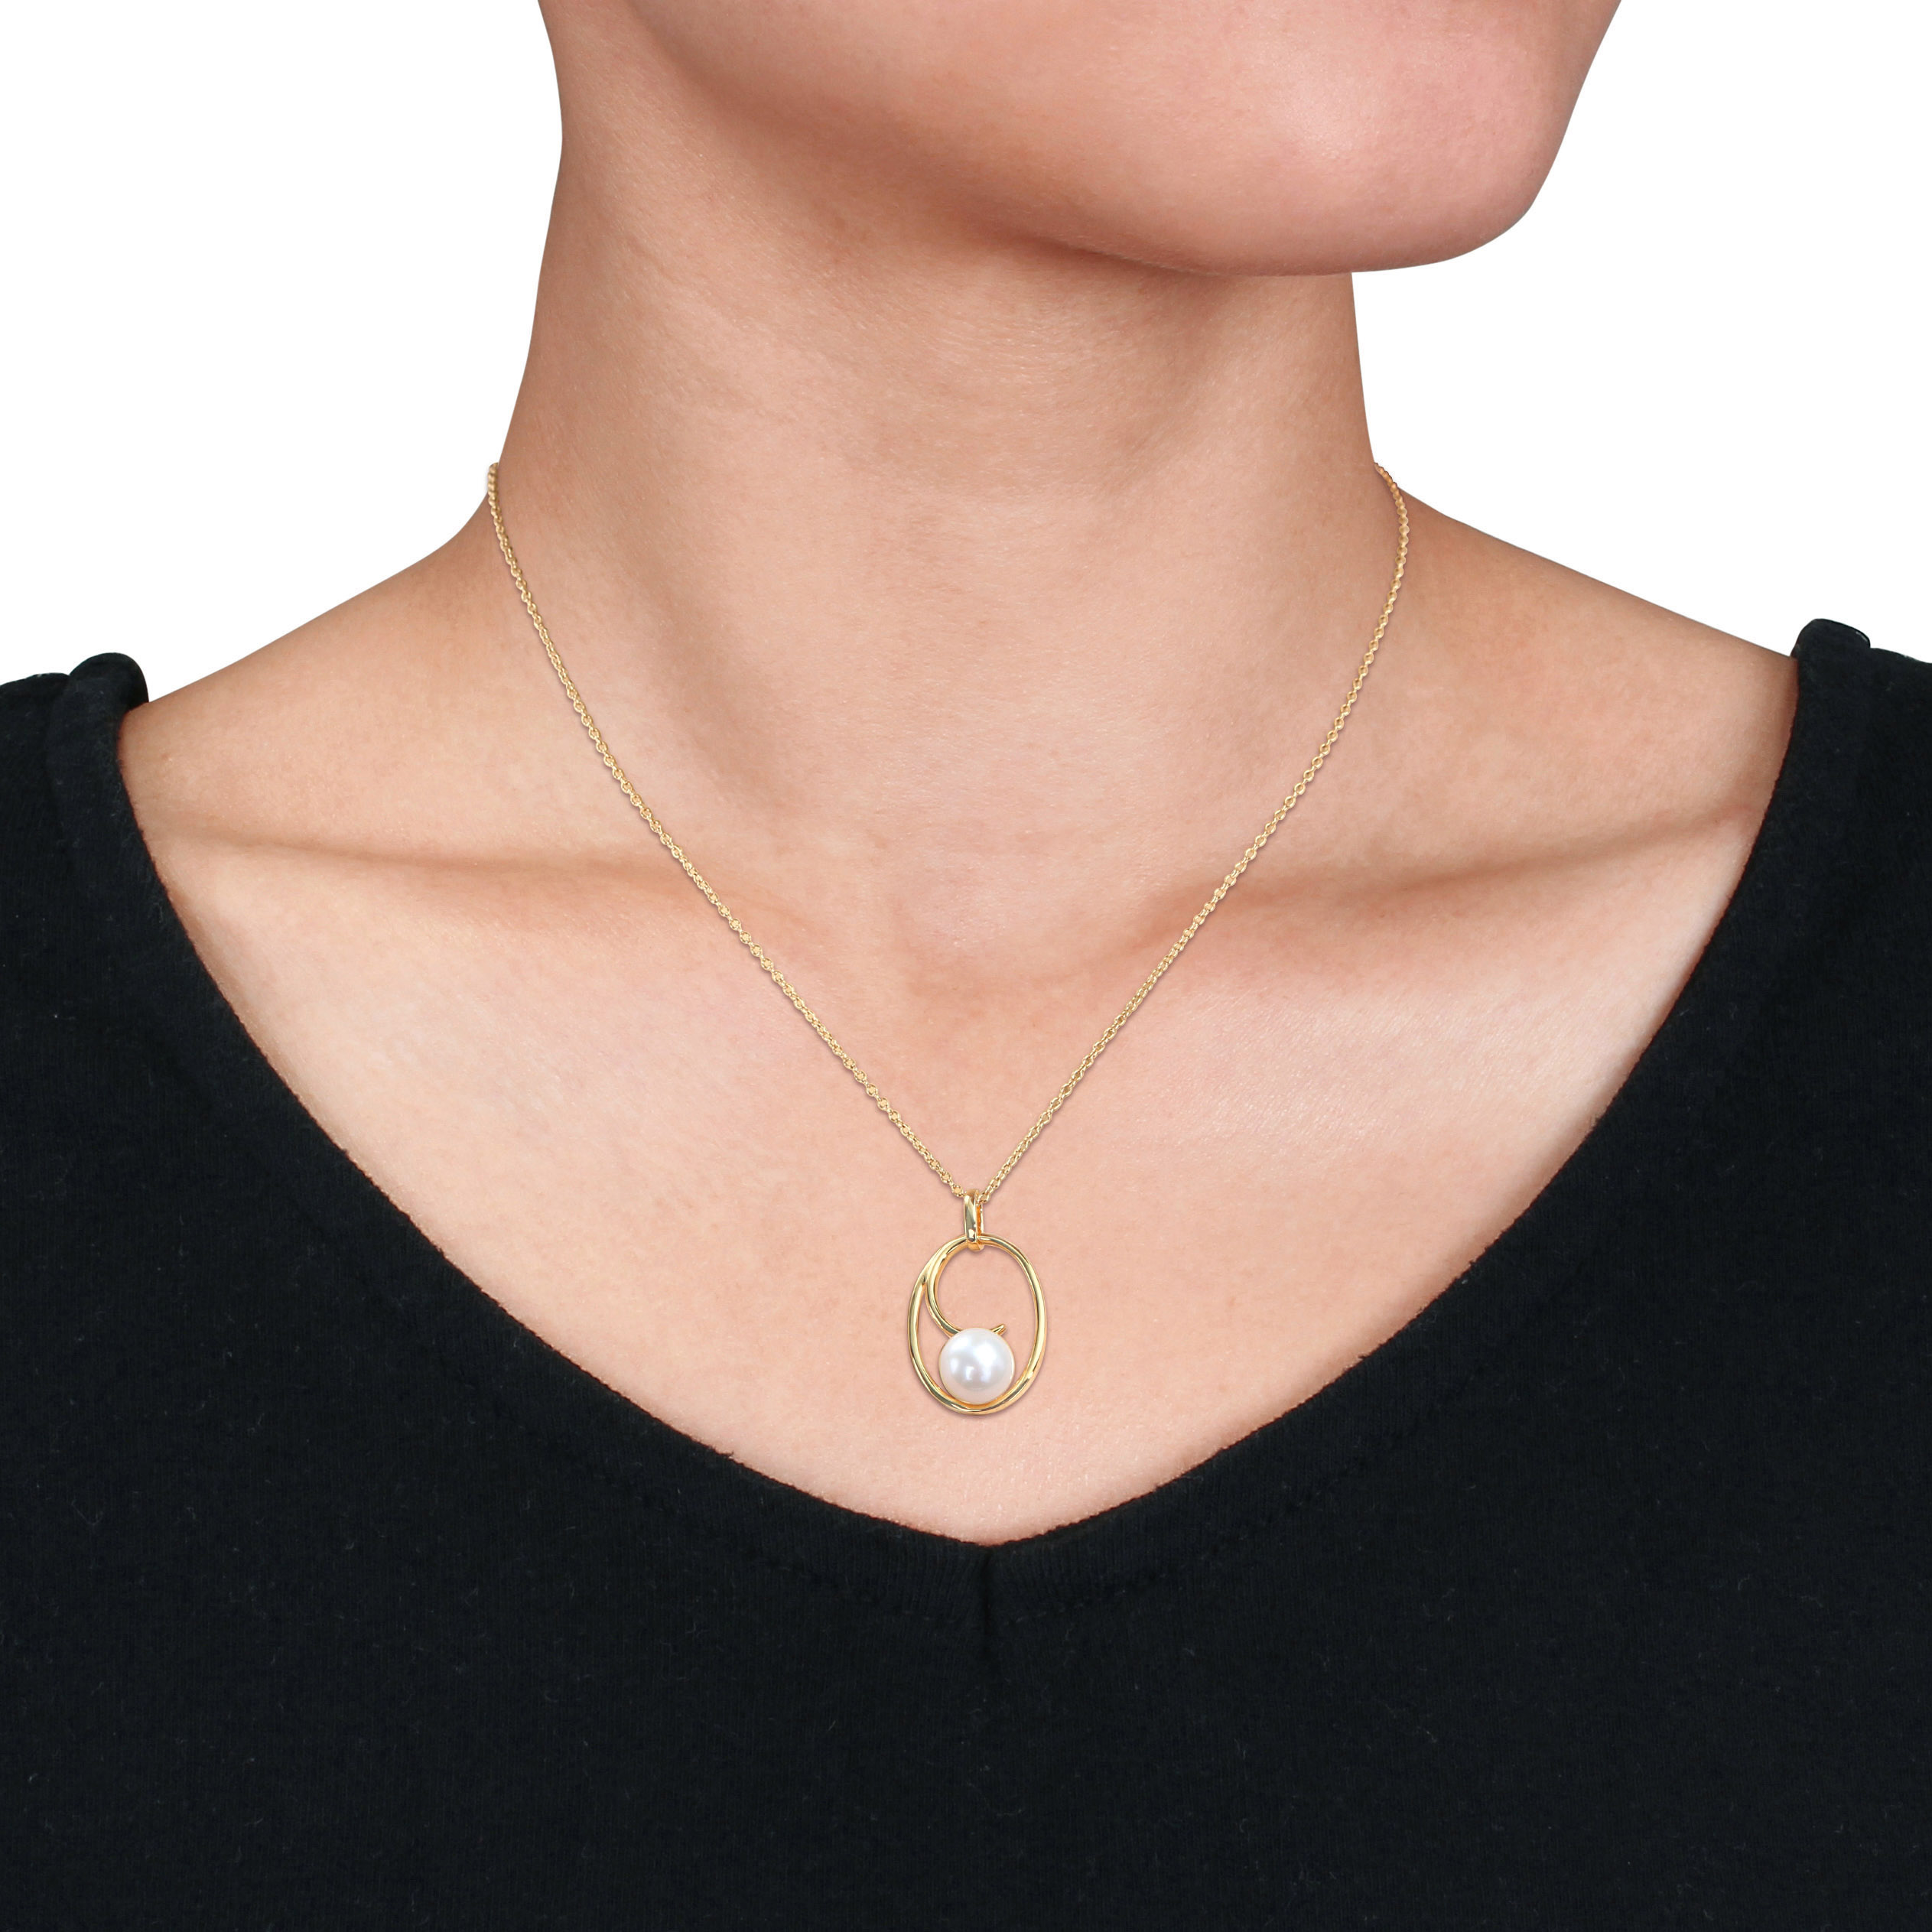 9.5-10 MM Cultured Freshwater Pearl Geometric Pendant with Chain in 18k Yellow Gold Plated Sterling Silver - 20 in.